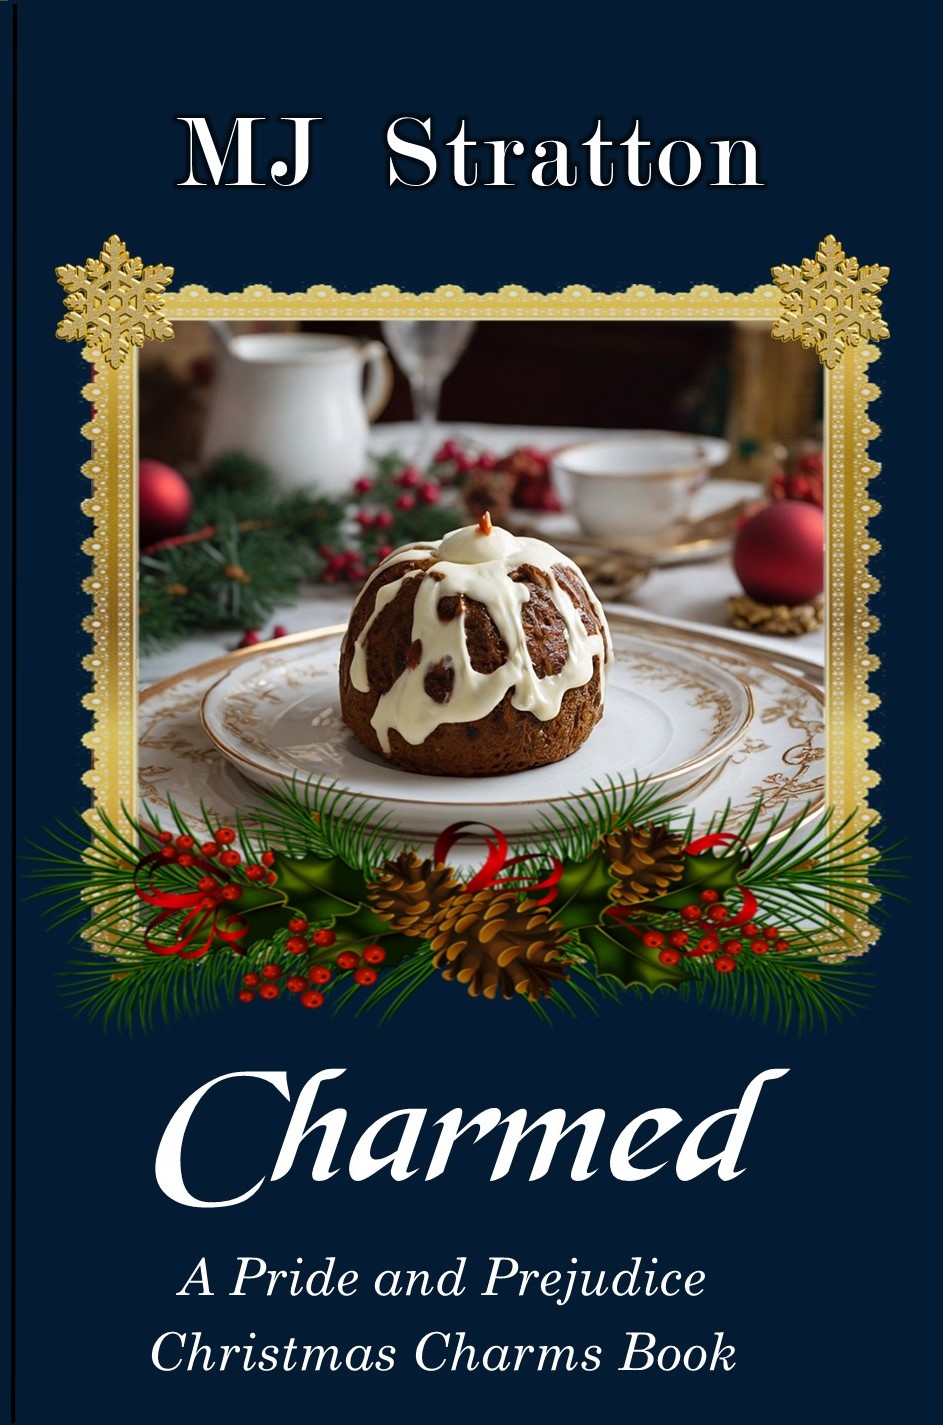 “Charmed” by MJ Stratton, excerpt + giveaway